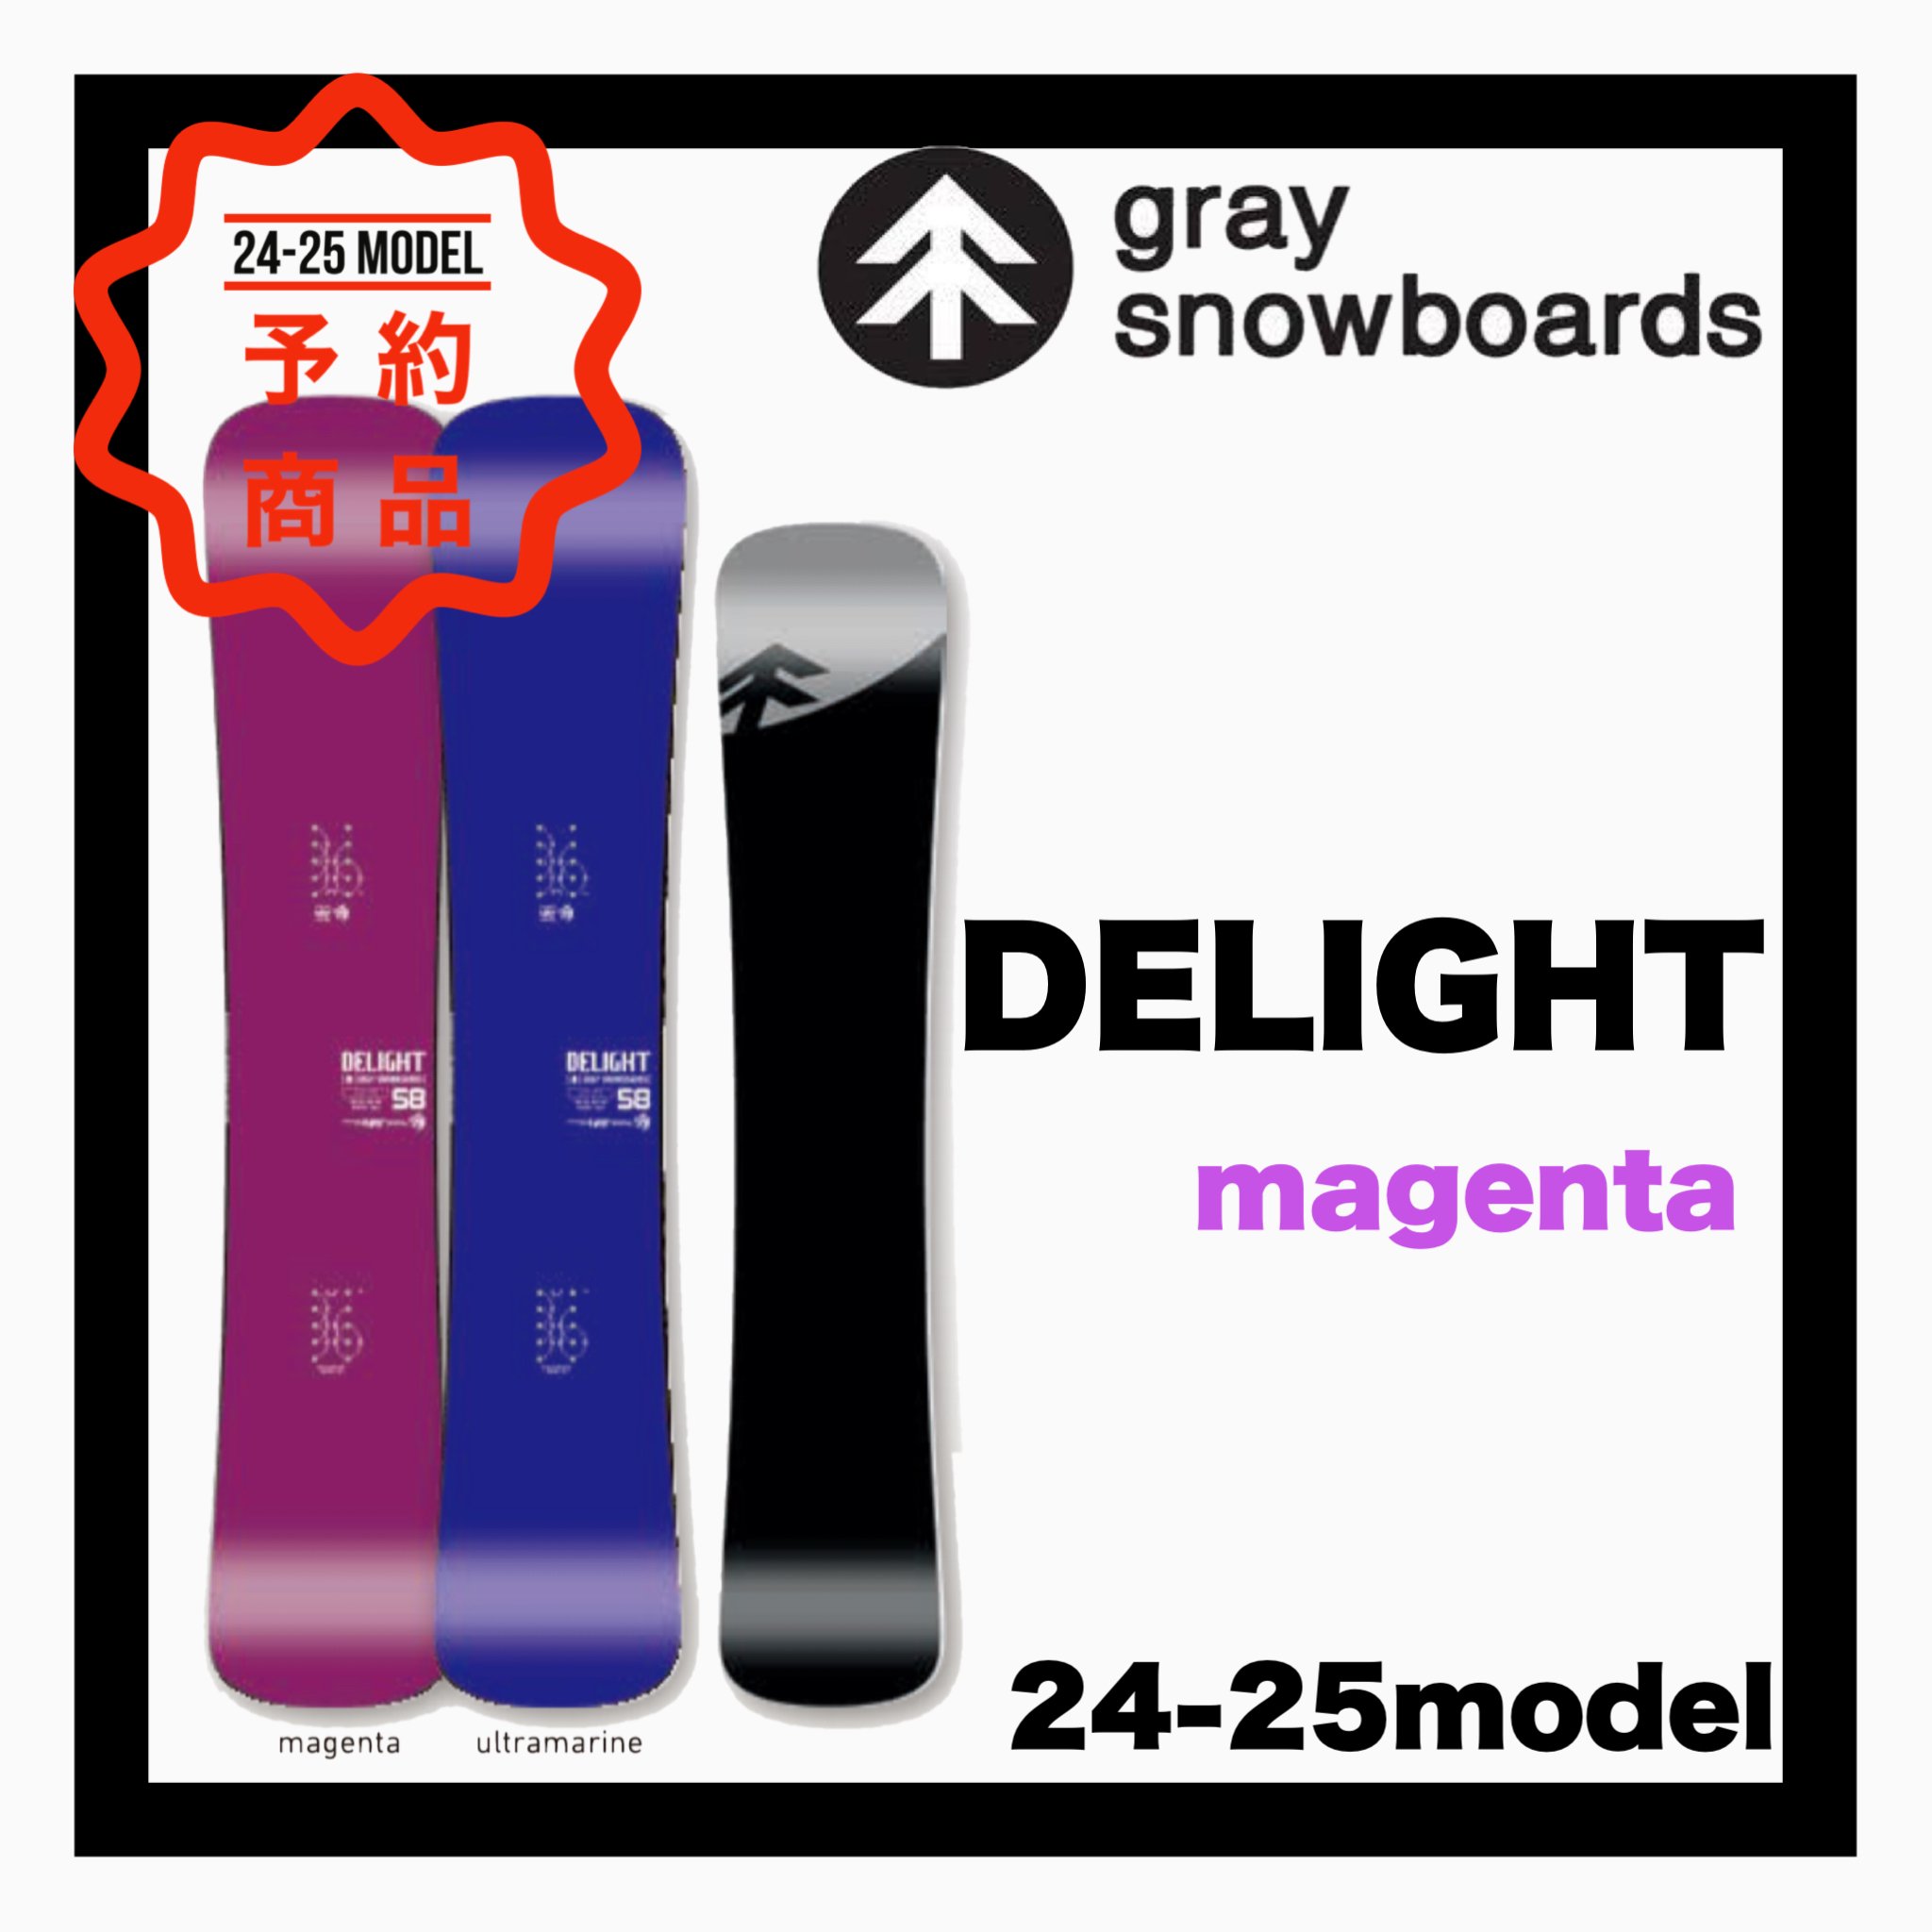 <img class='new_mark_img1' src='https://img.shop-pro.jp/img/new/icons14.gif' style='border:none;display:inline;margin:0px;padding:0px;width:auto;' />GRAY   DELIGHT magenta